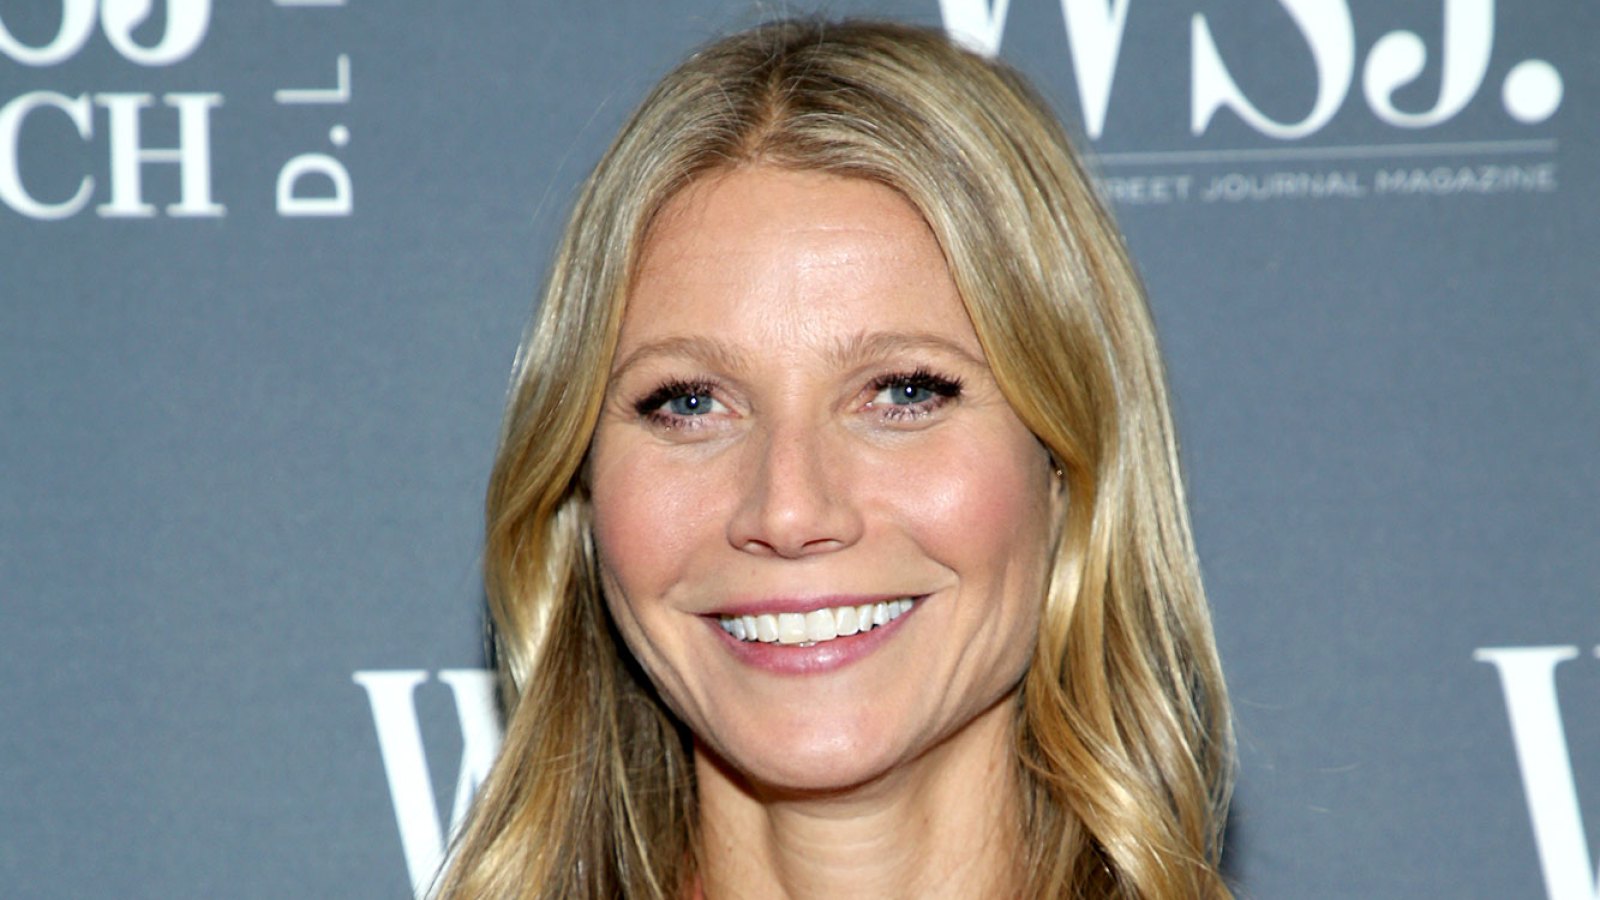 Gwyneth Paltrow Initially Turned Down ‘Shakespeare in Love’ After ‘Terrible Breakup’ With Brad Pitt